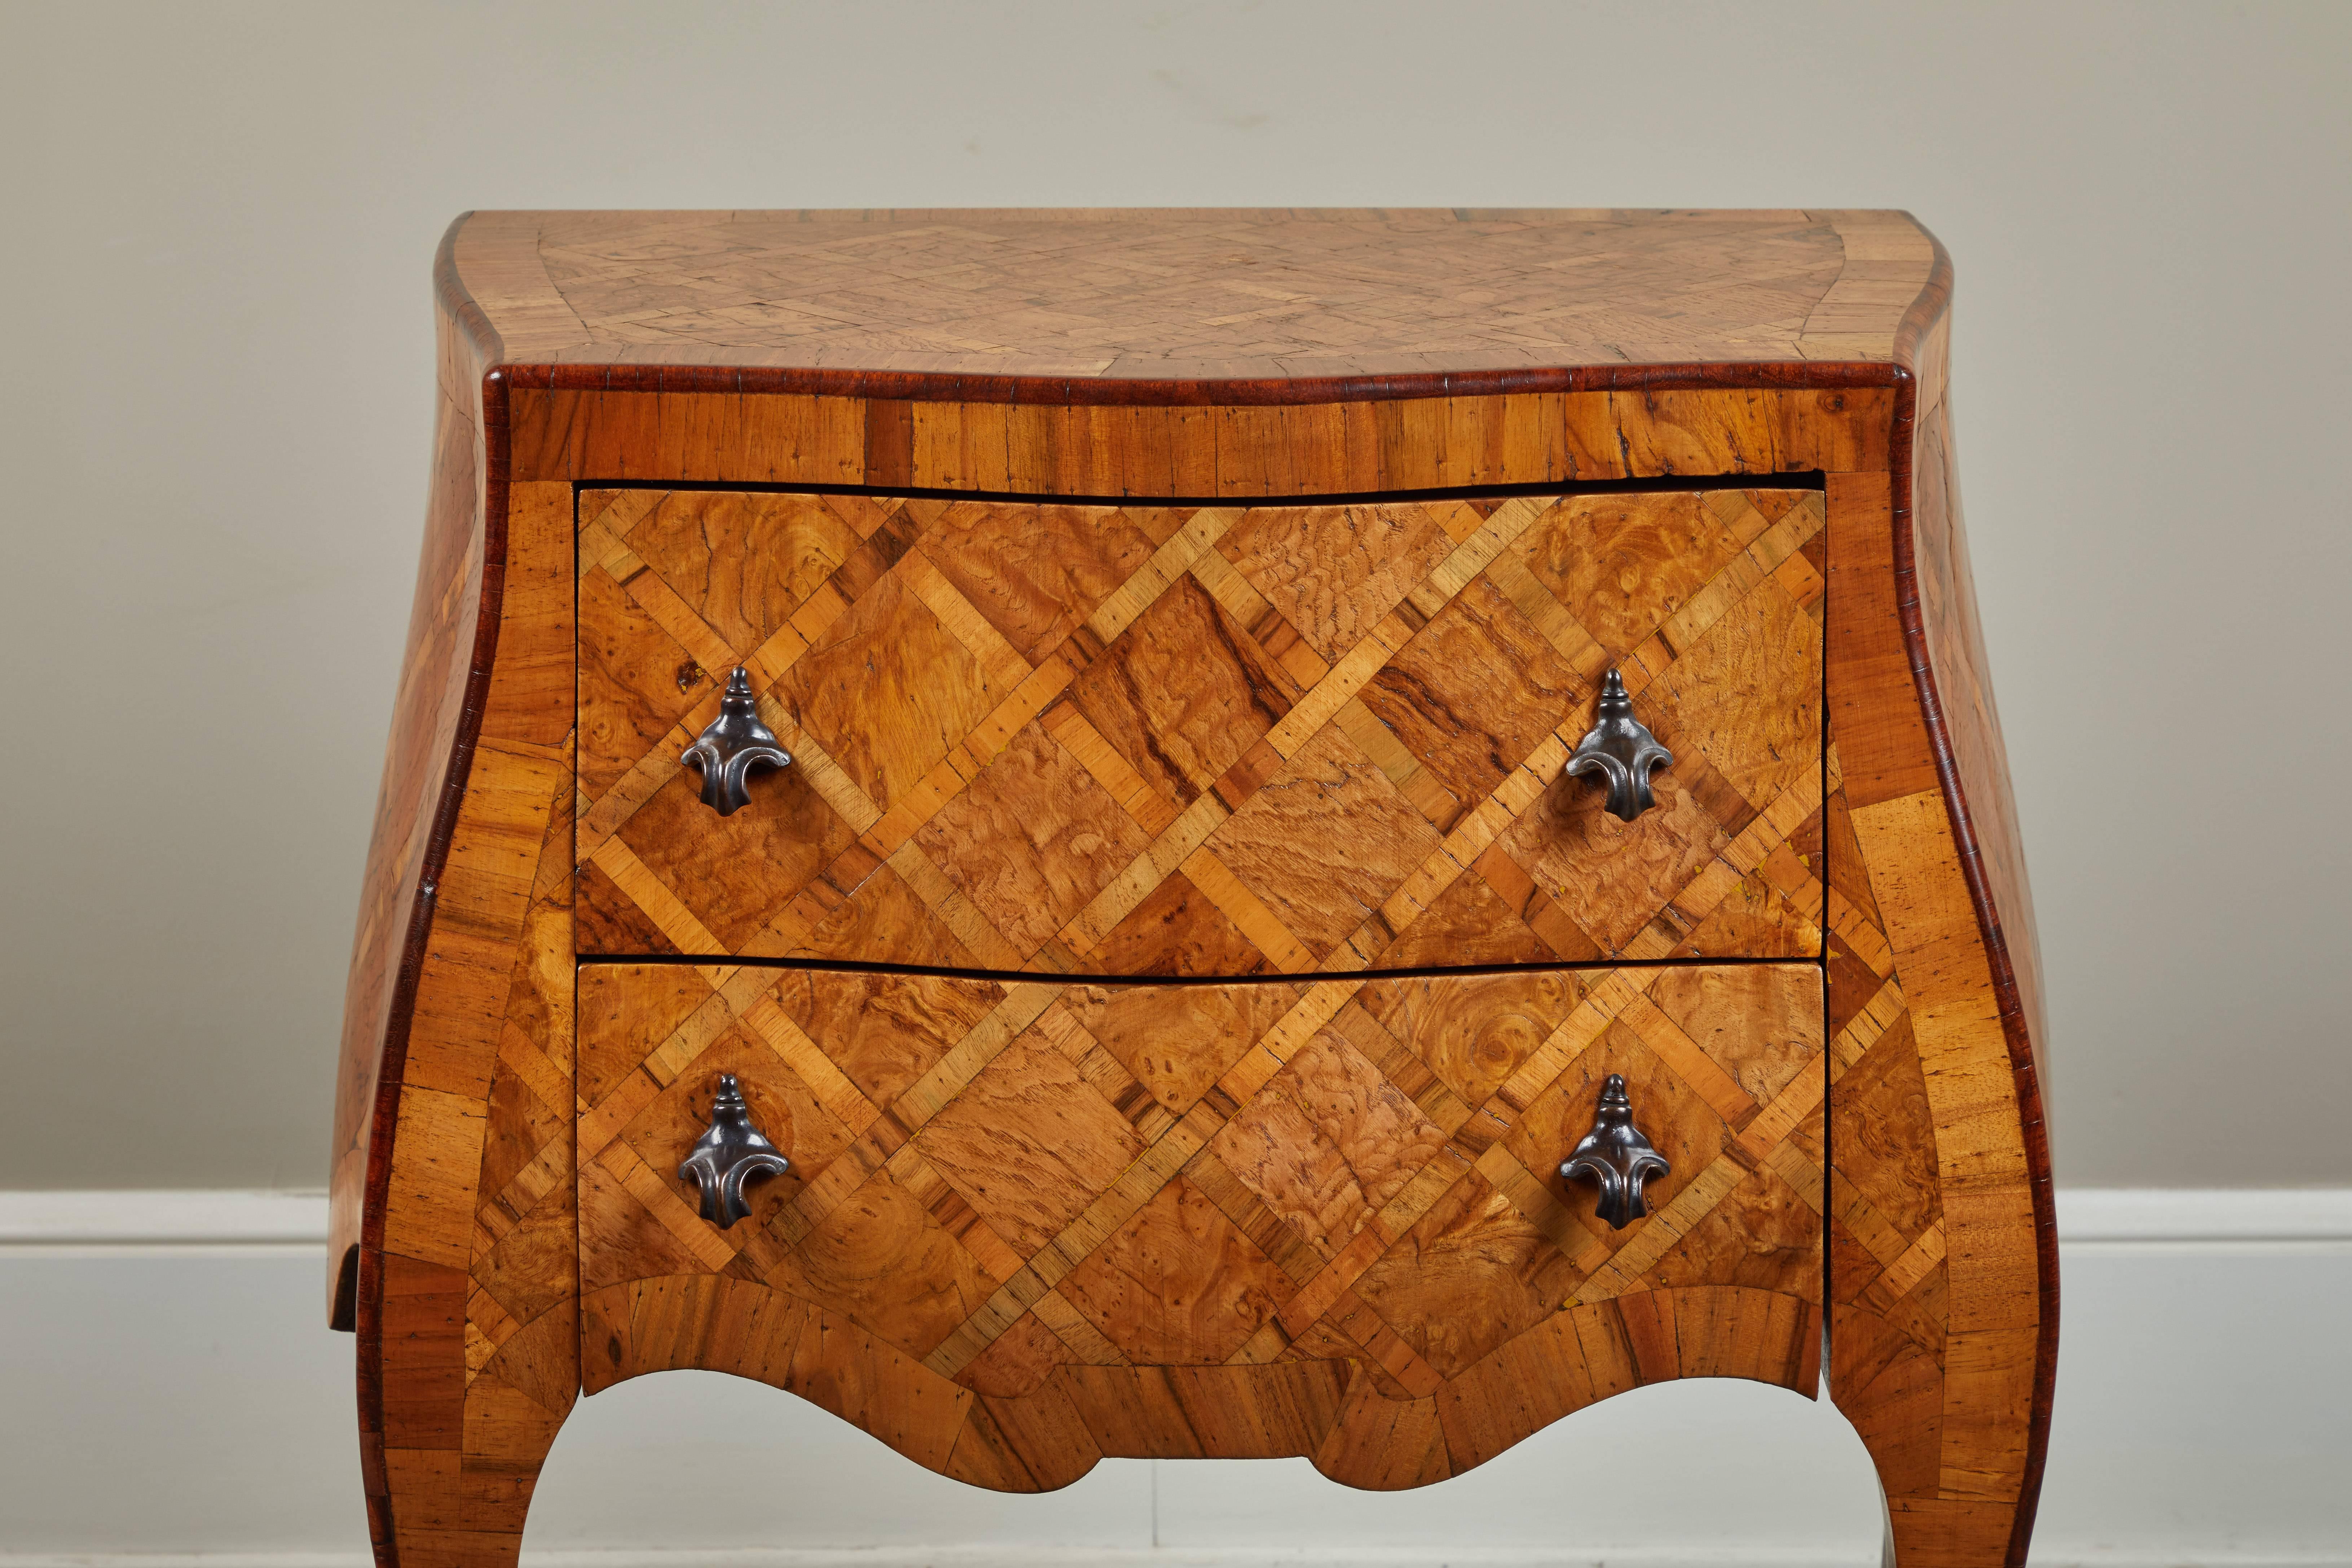 An early 20th century petite Italian marquetry chest of drawers. Gorgeous dark hardware on two drawers.